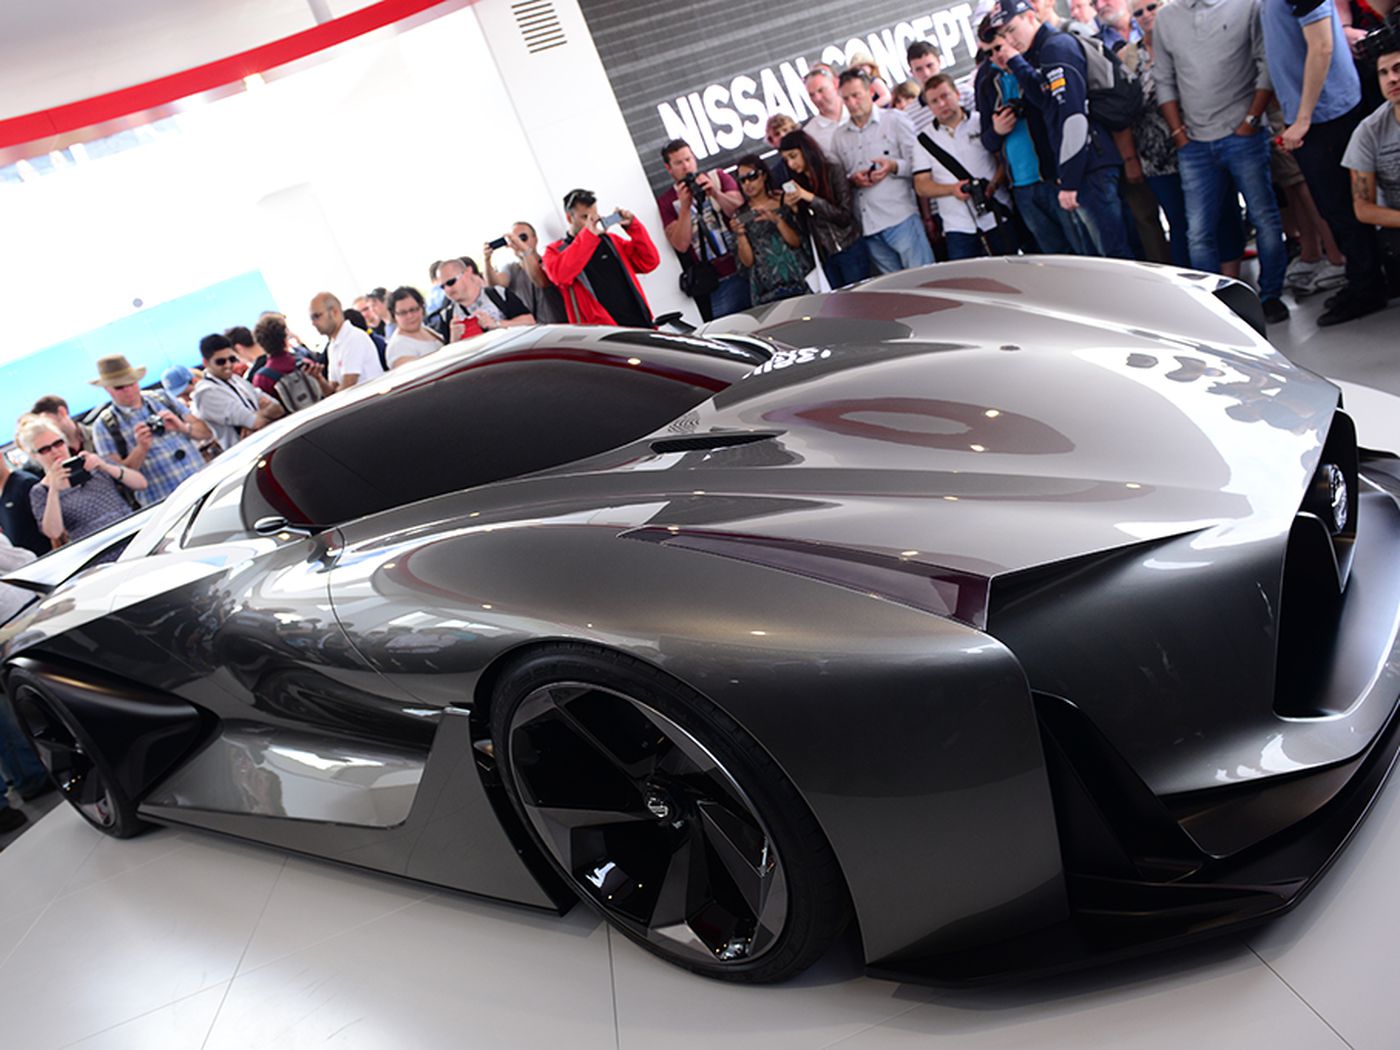 Nissan builds a real-life version of its stunning 'Gran Turismo' supercar -  The Verge